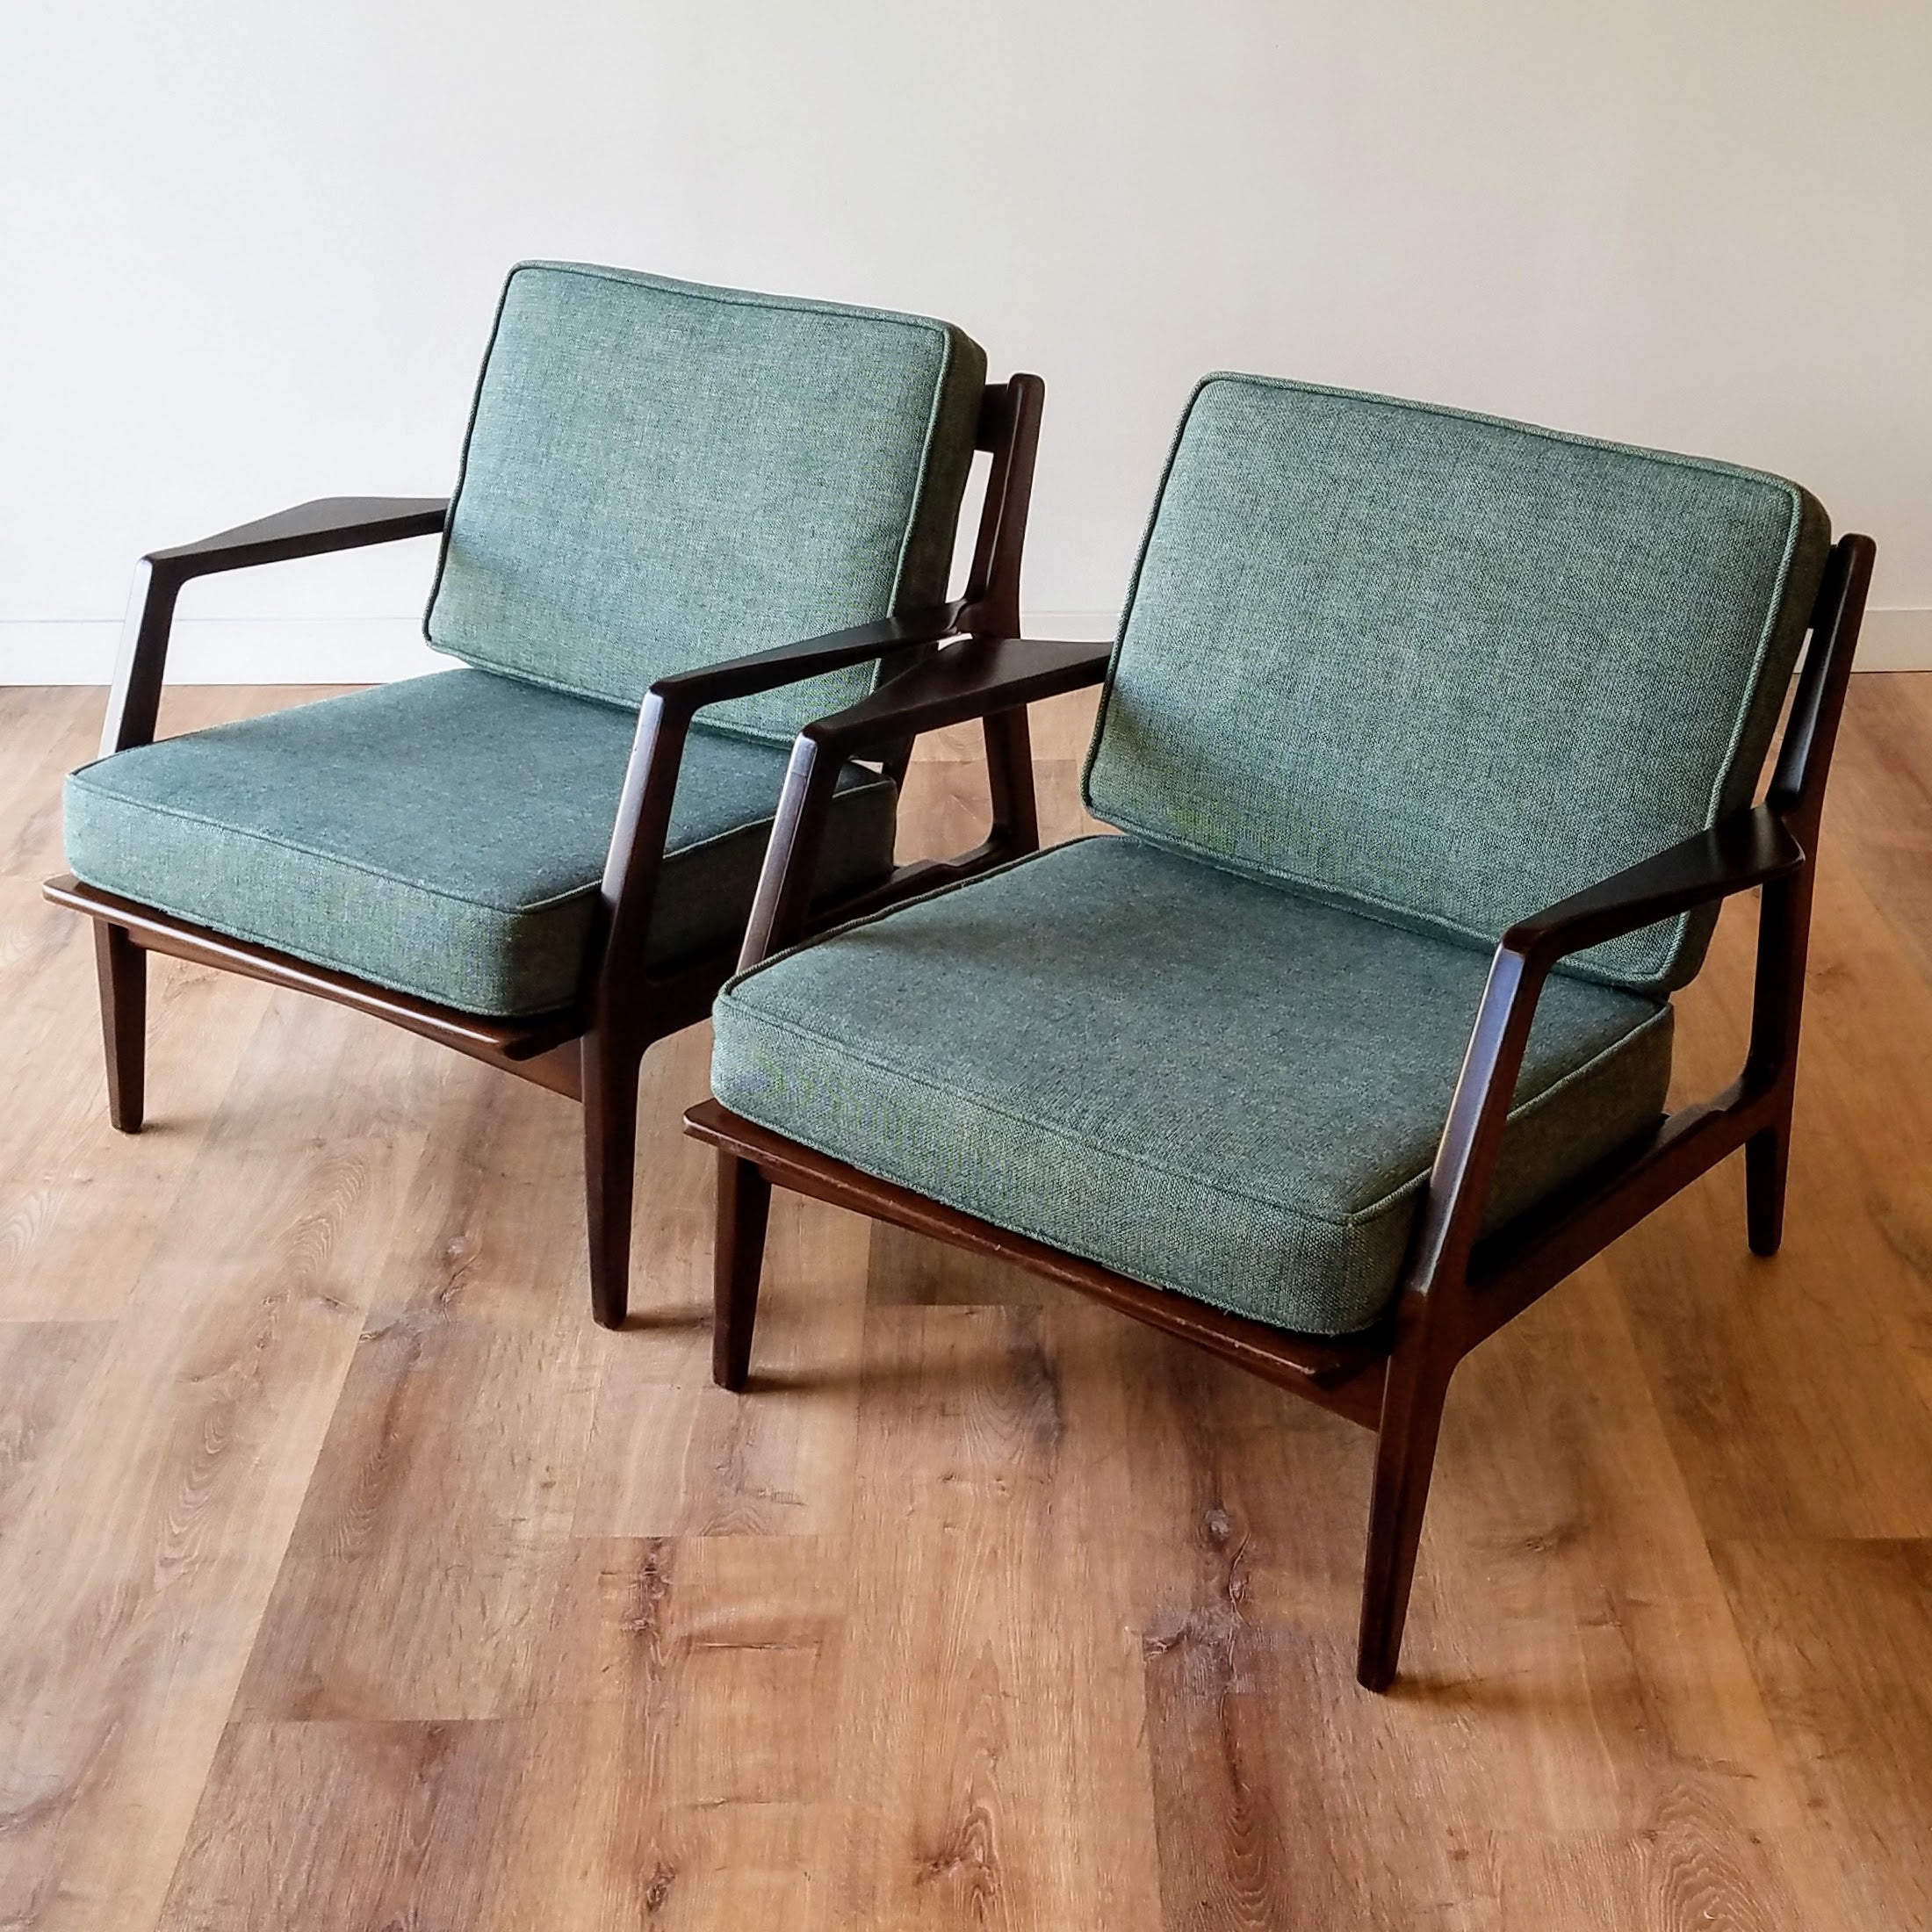 Lawrence Peabody Lounge Chairs